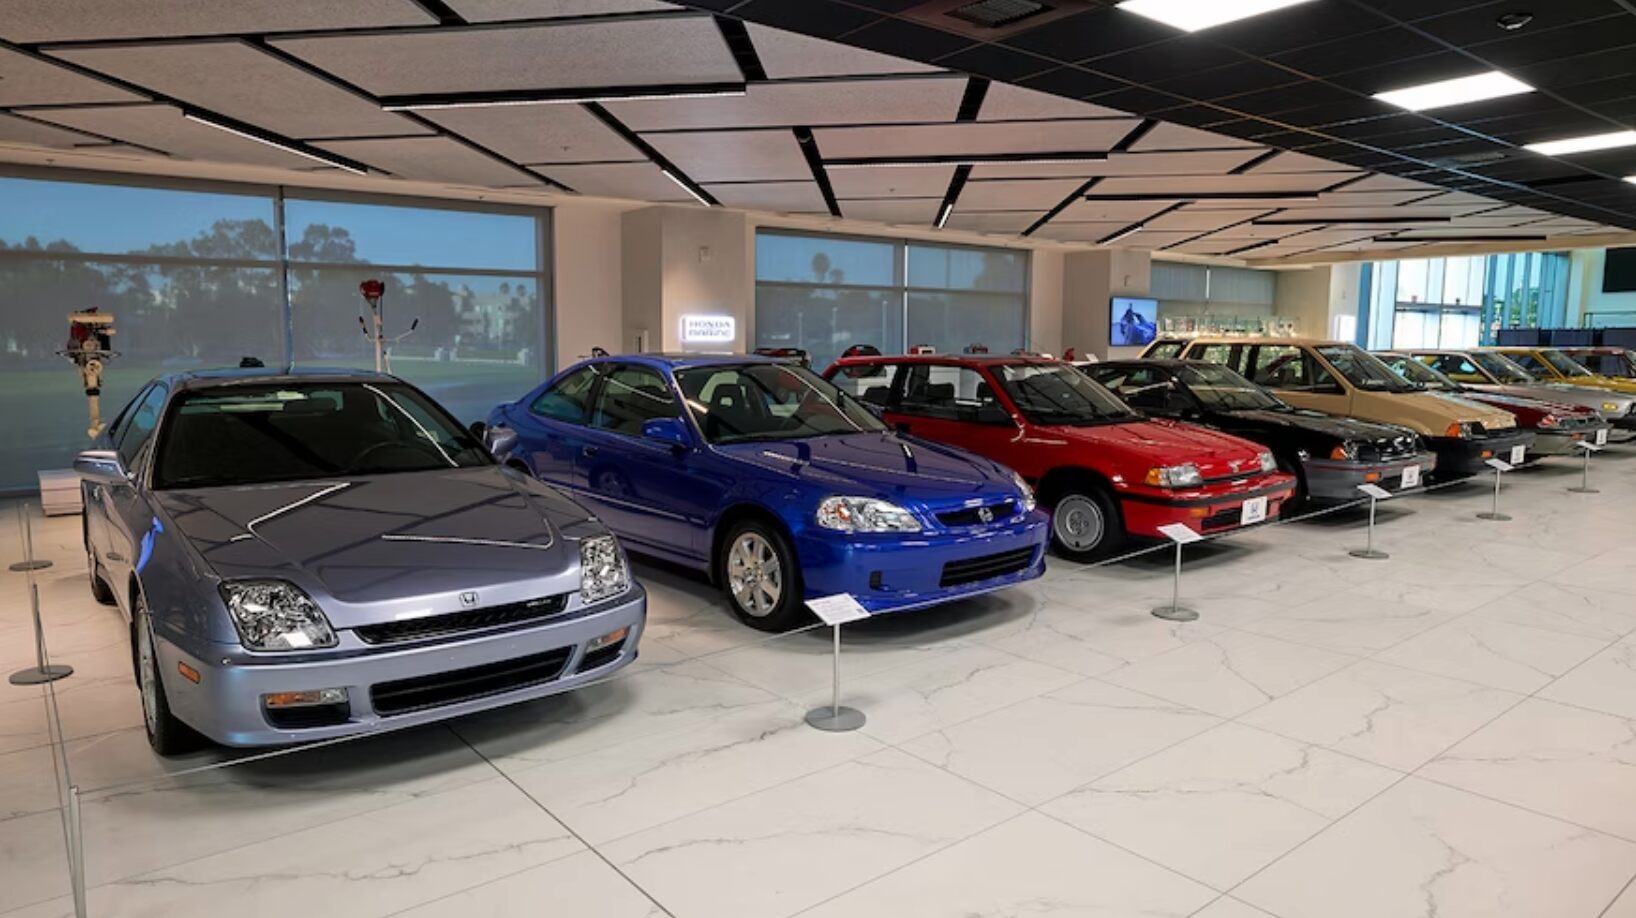 A row of Honda sedans in the new museum